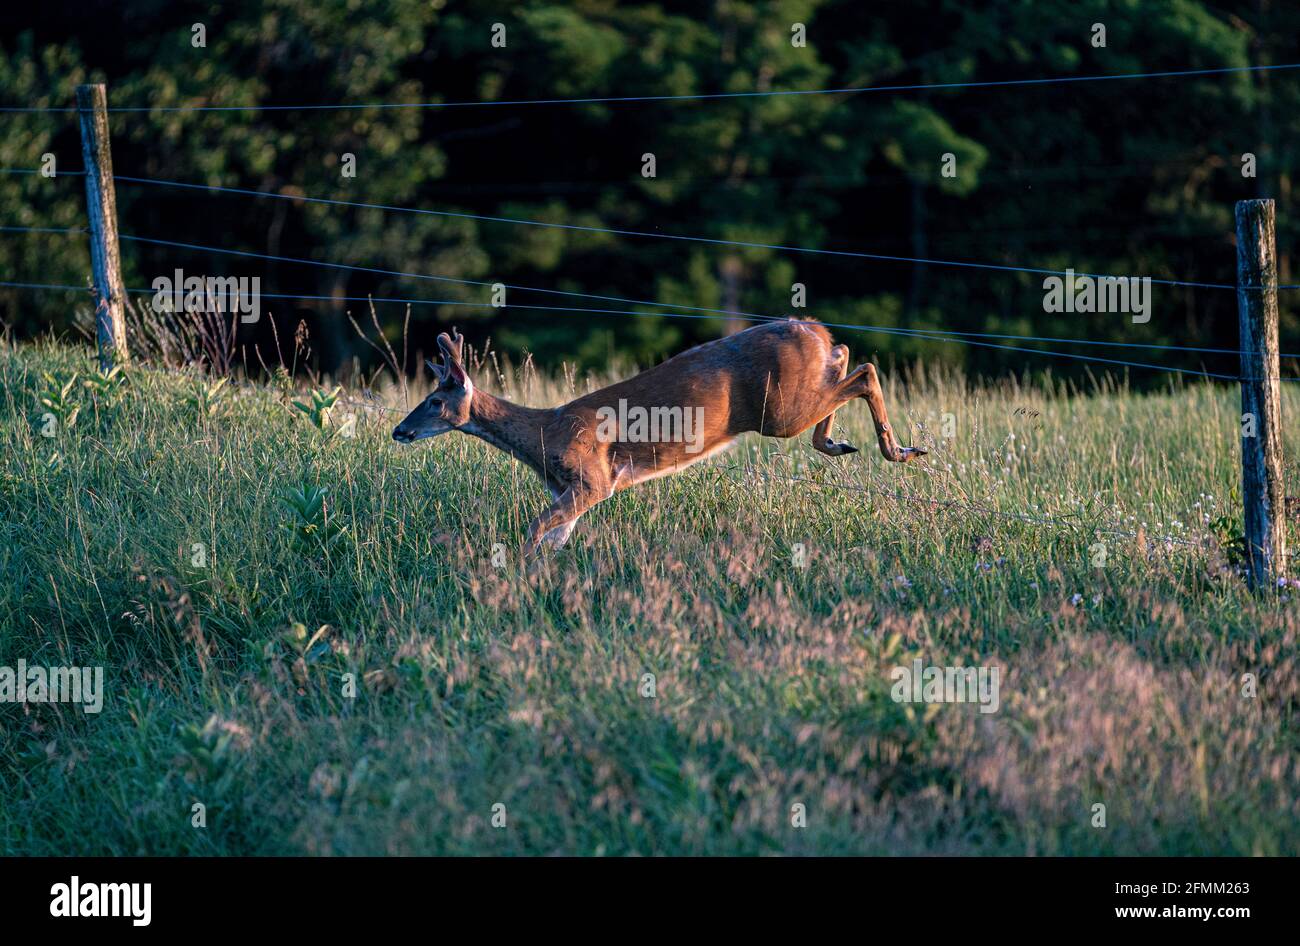 A White Tailed deer jumps through a fence late in the afternoon Tuesday, Aug. 4, 2020 in Waushara County, Wisconsin. Stock Photo